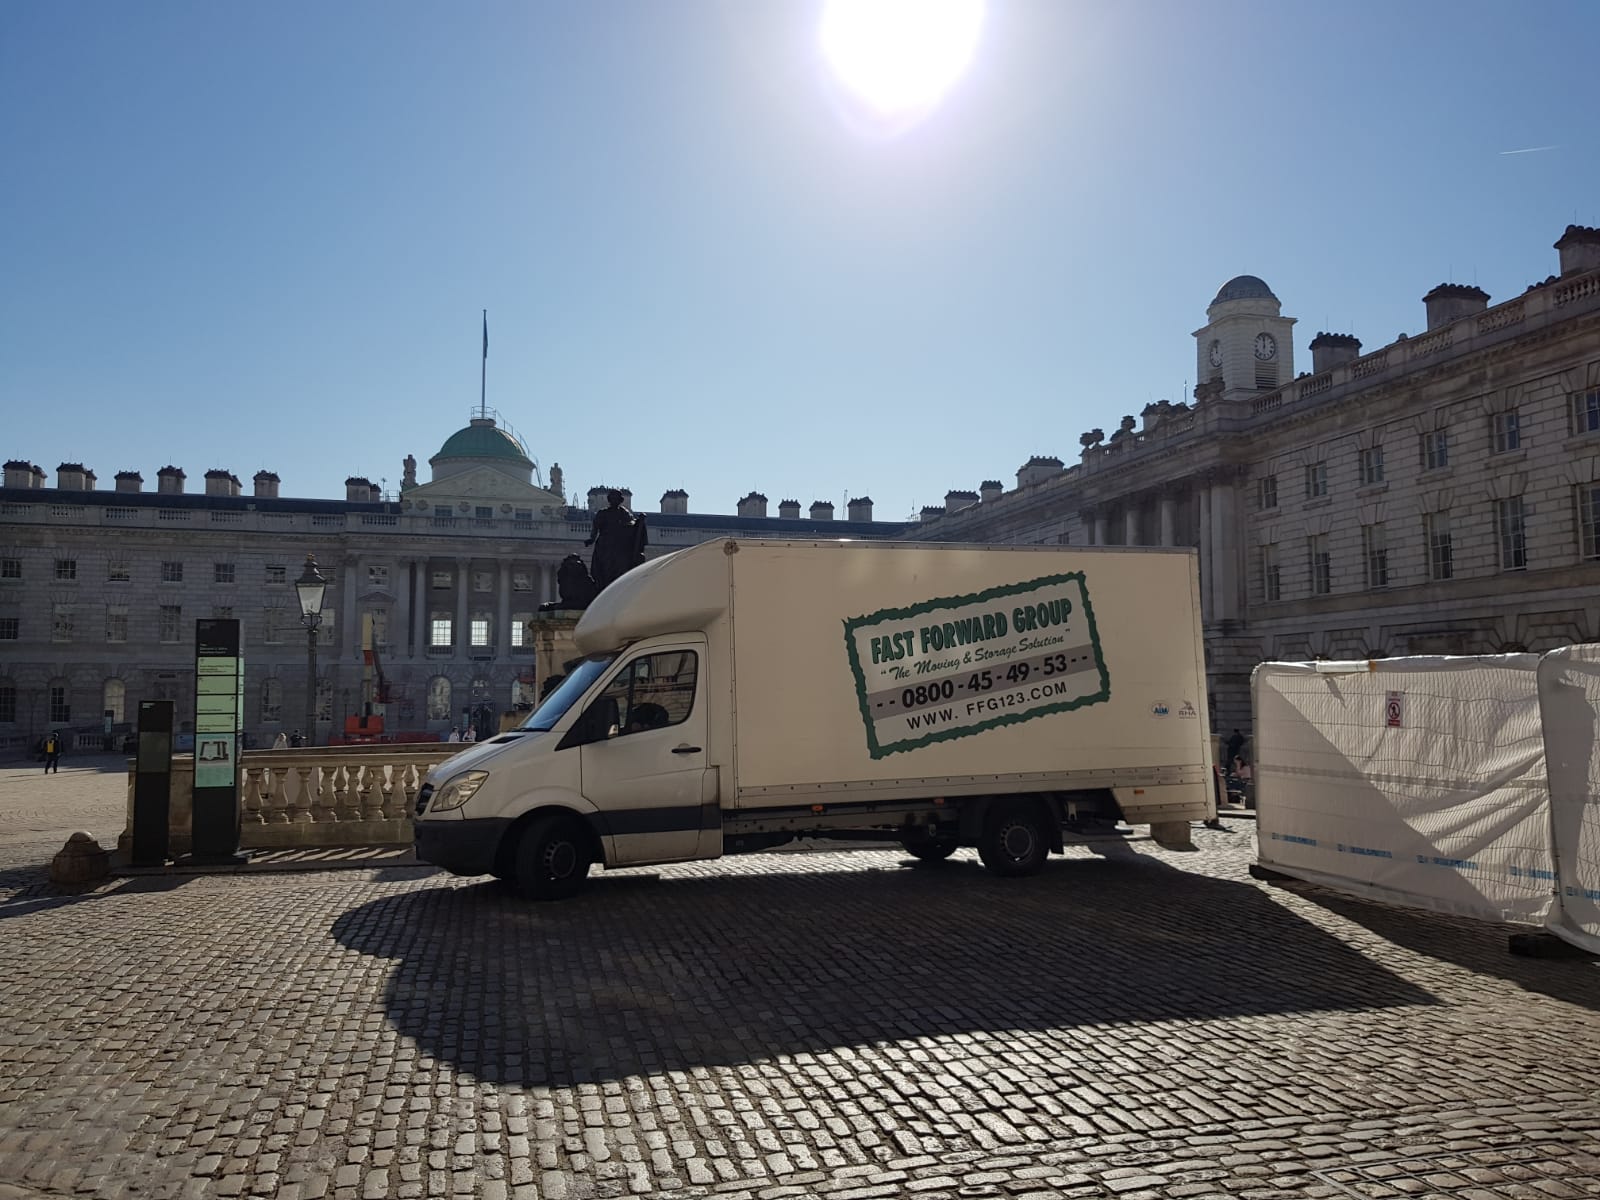 Fast Forward Group Removals van - What’s the best day to move office? 